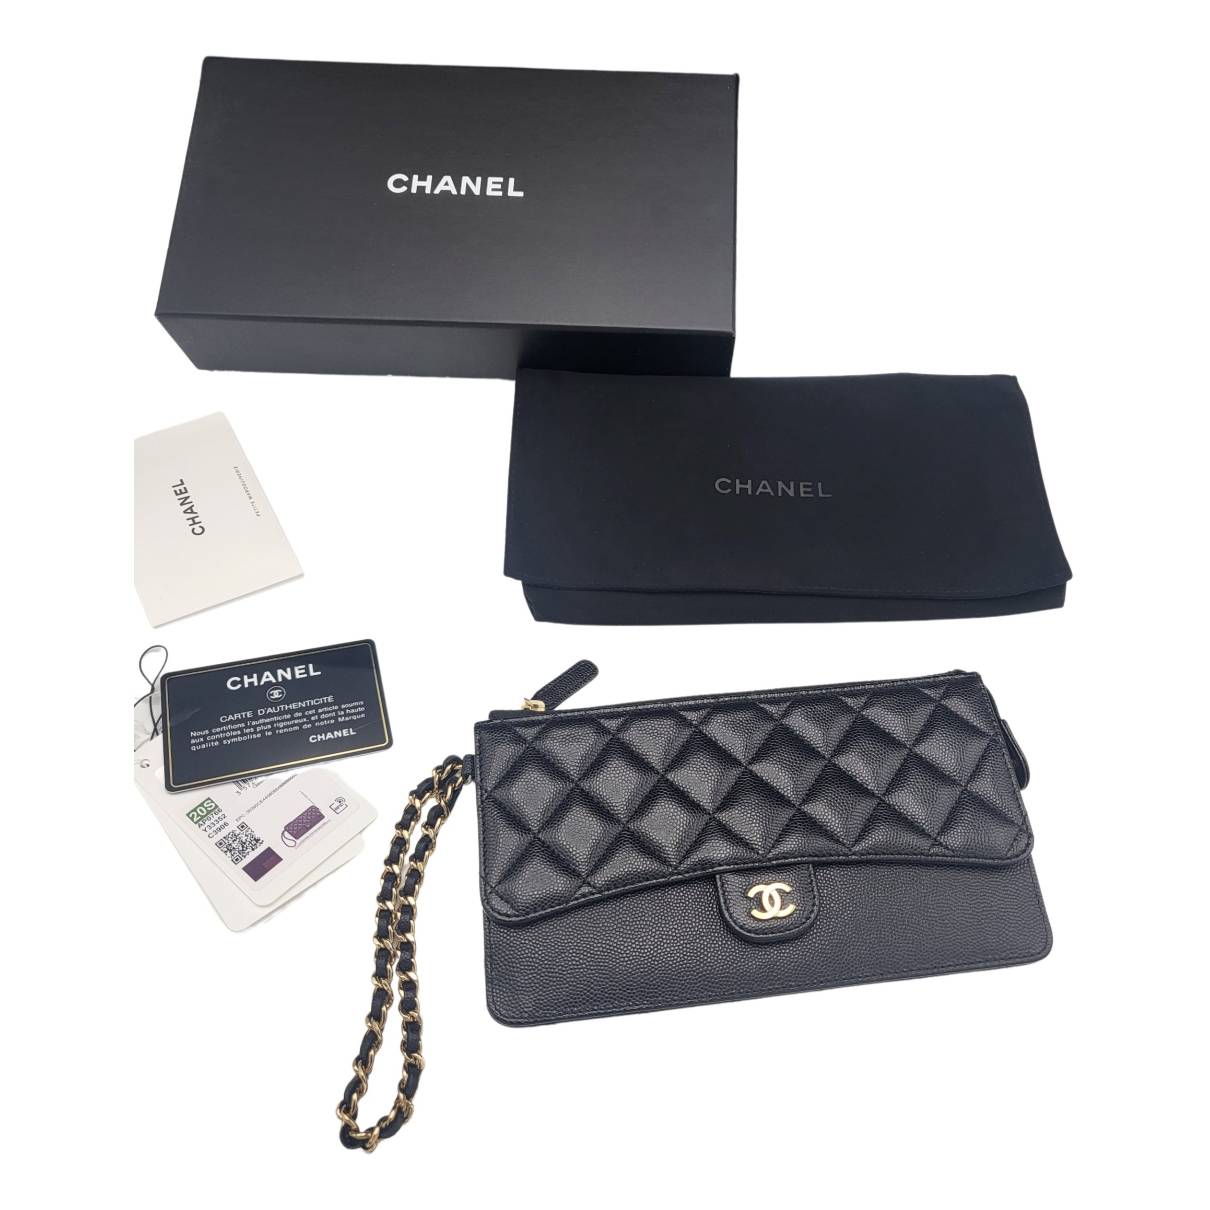 Timeless/classique leather clutch bag Chanel Black in Leather - 30326753